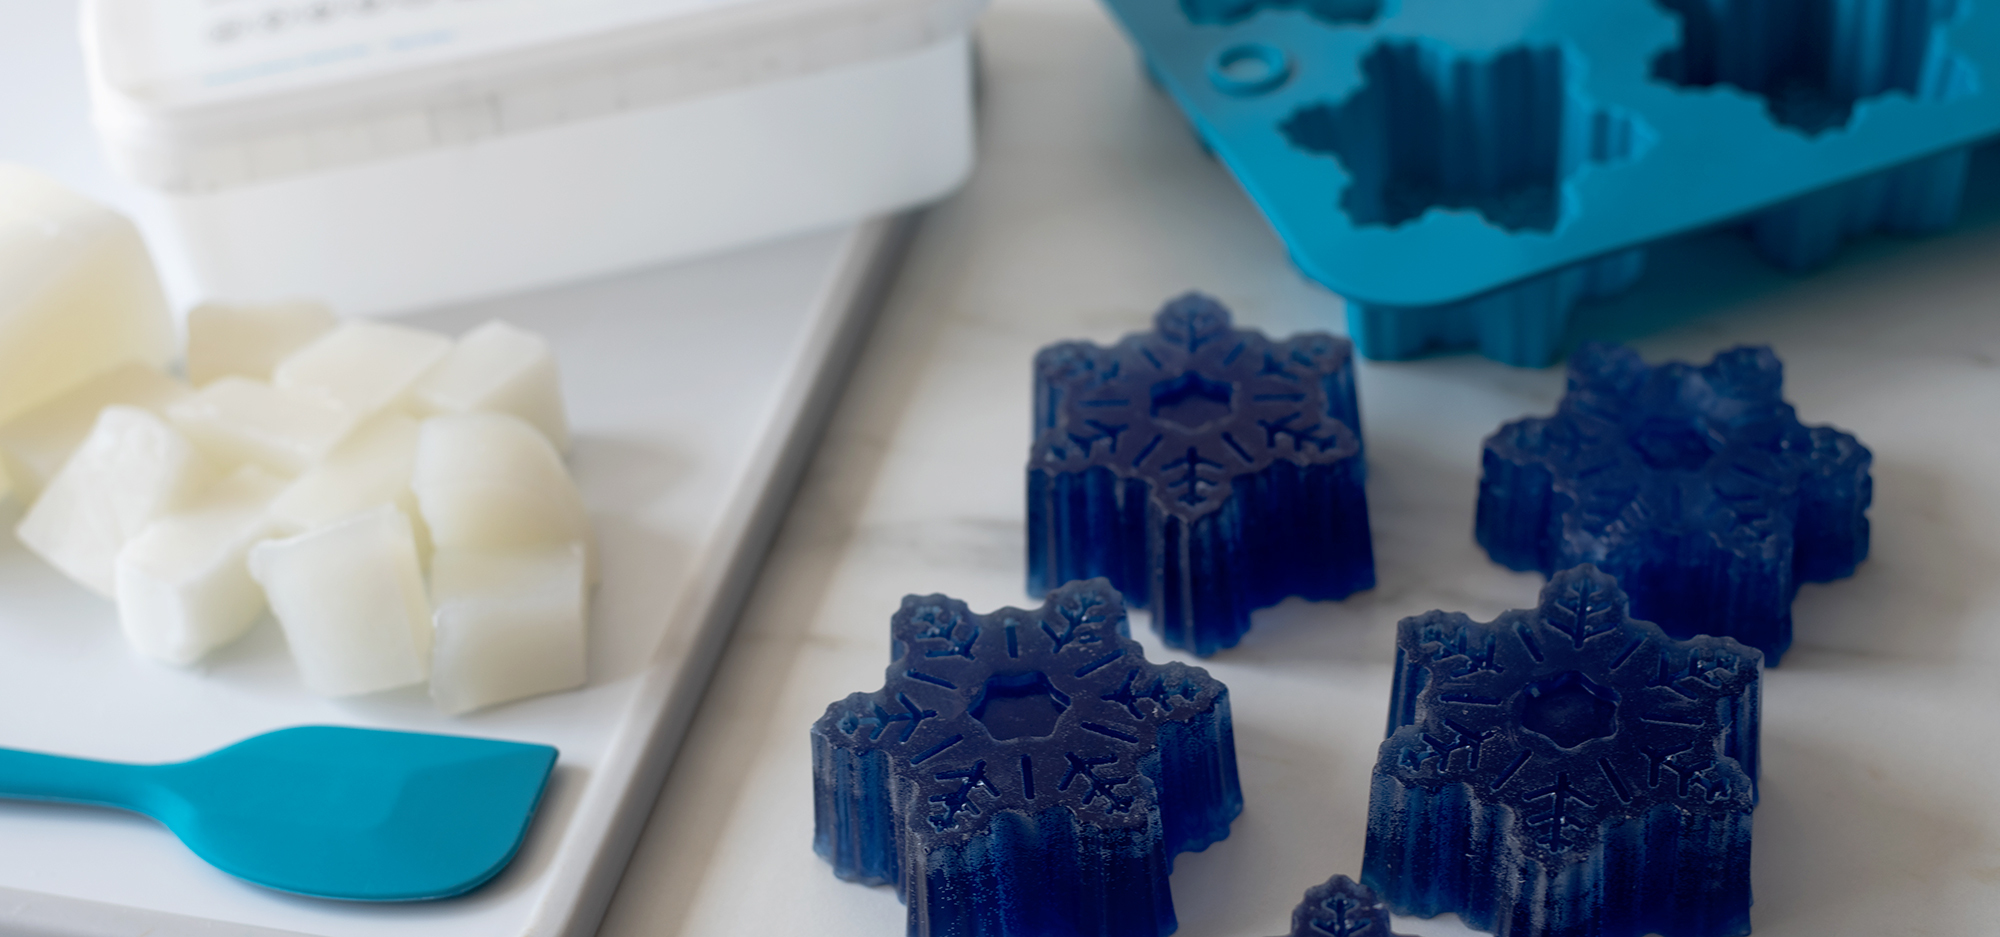 Snowflake soaps made from silicone mold.